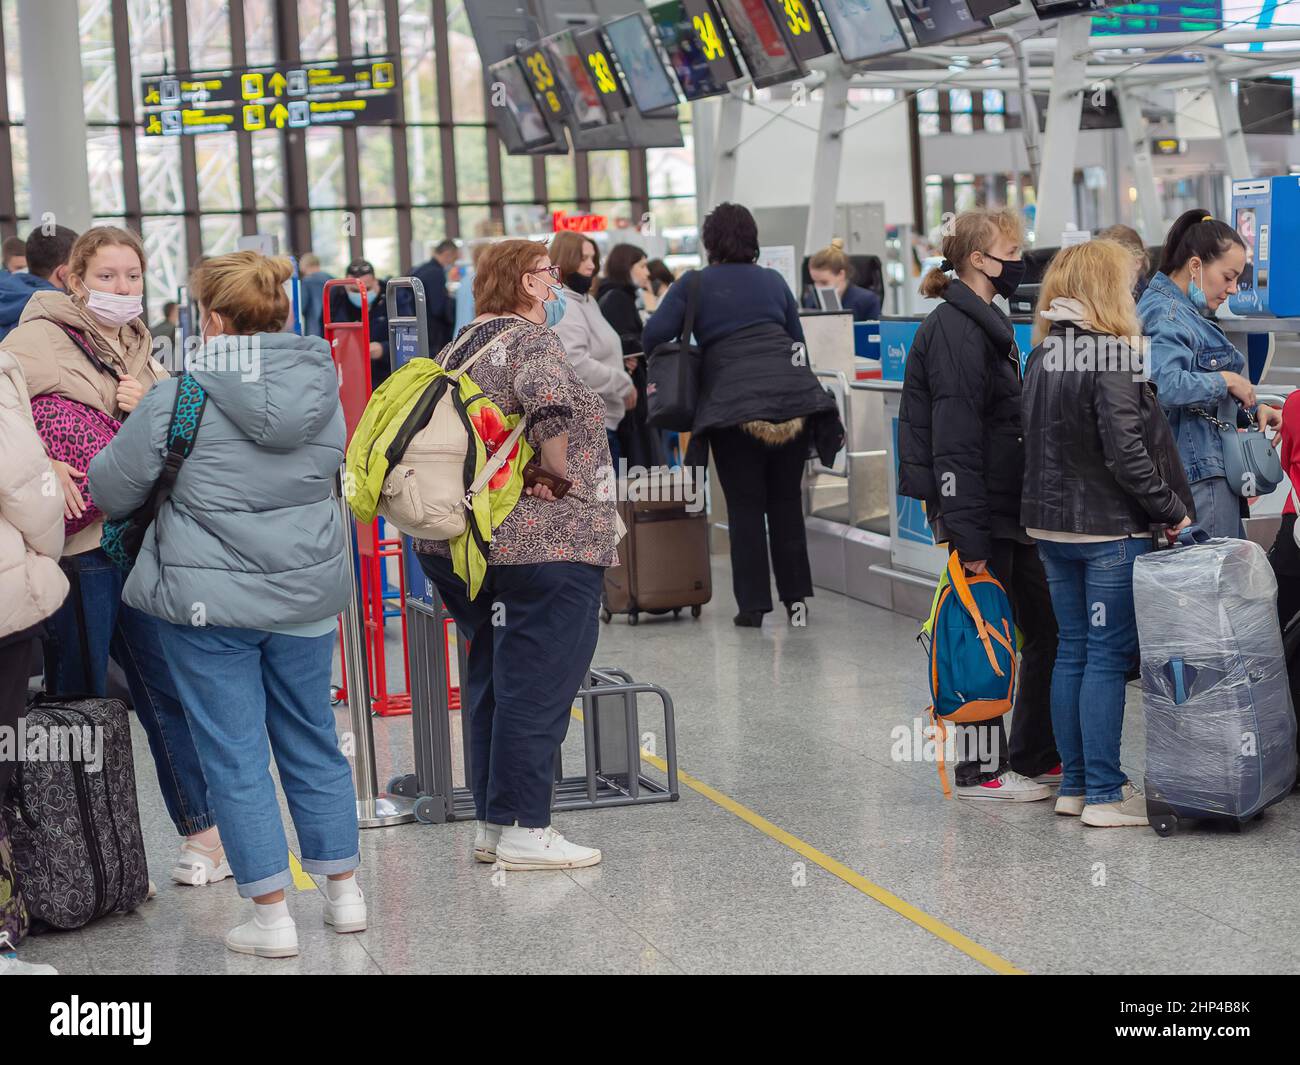 Russia, Sochi 02.11.2021. Passengers stand in line at the check-in counter for airplane flight. Flights at the airport during the coronavirus Stock Photo